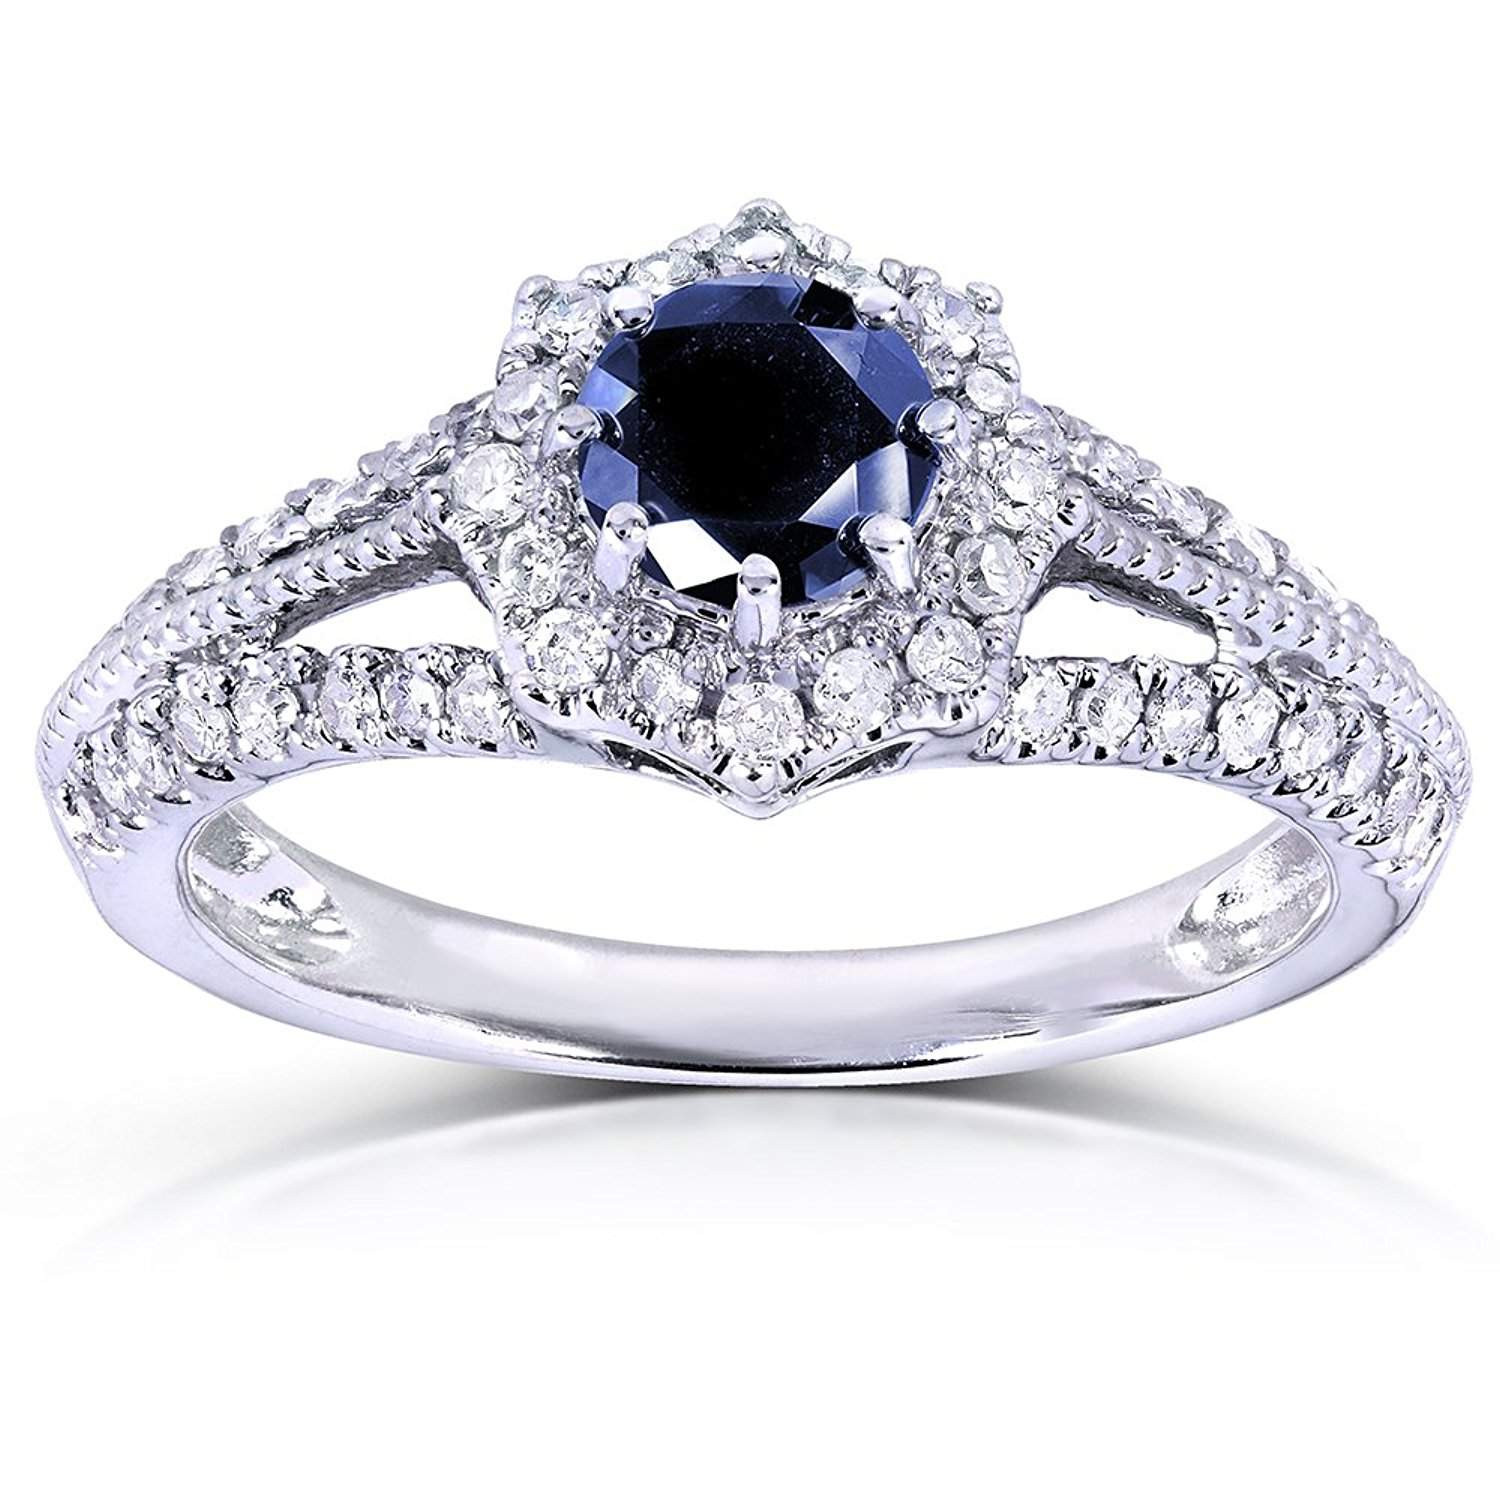 Diamond Engagement Rings Cheap
 Top 10 Best Valentine’s Day Deals on Engagement Rings